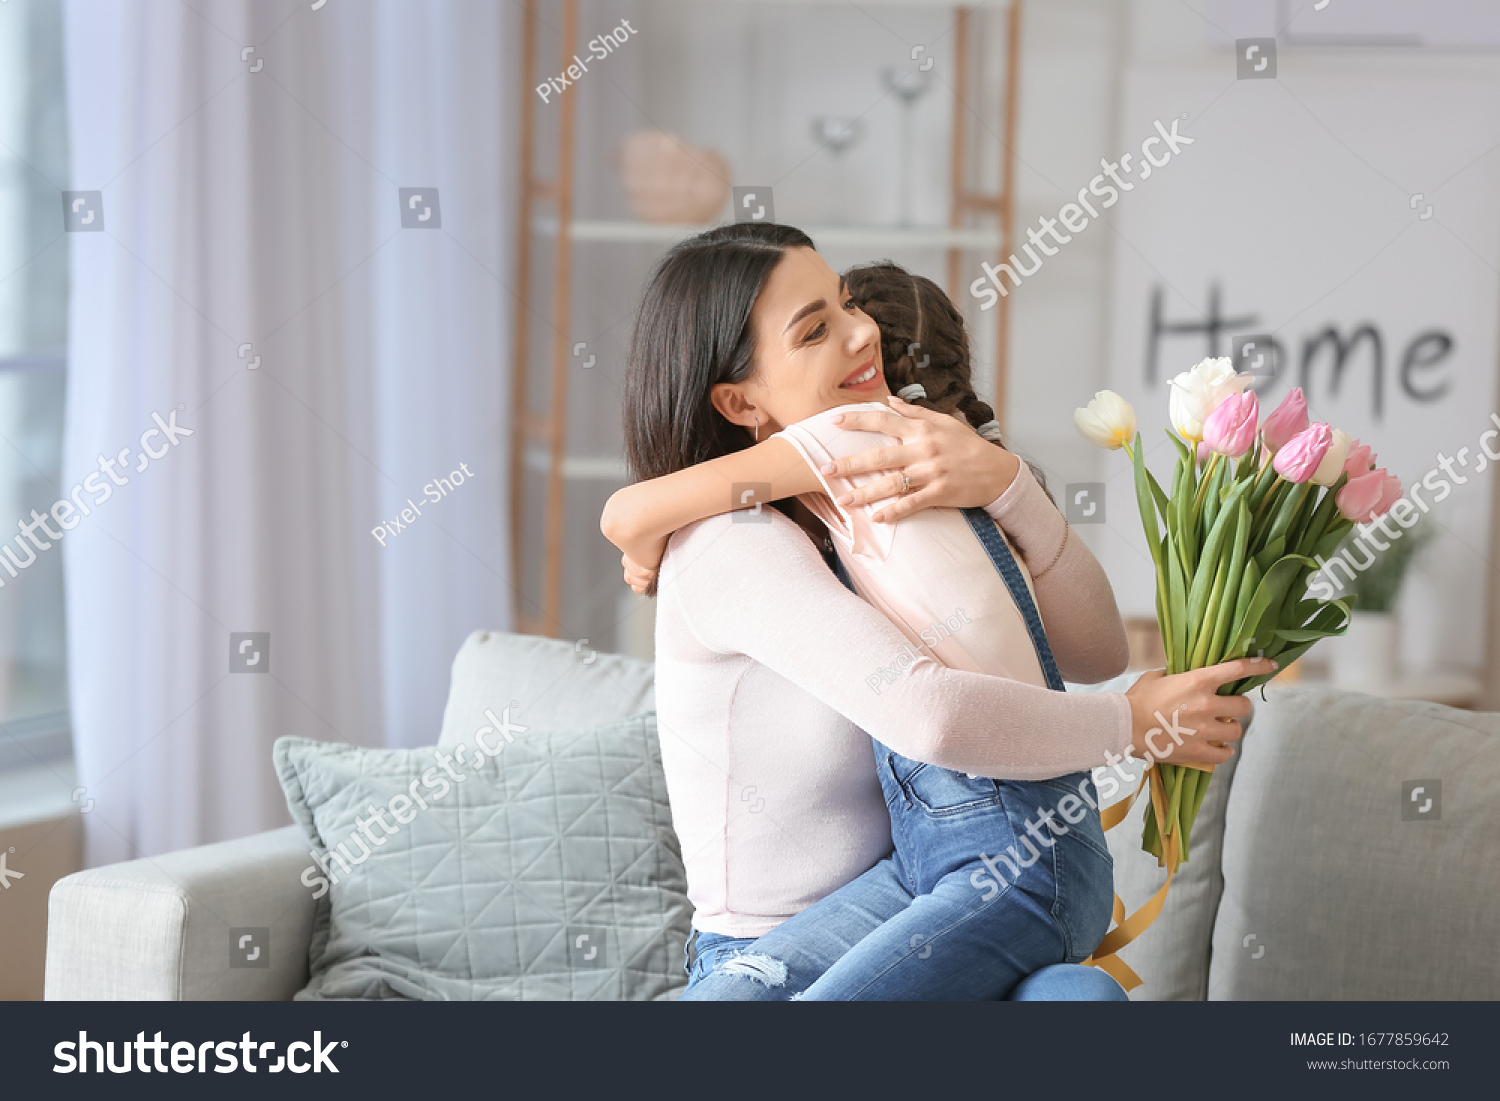 Little girl greeting her mom with Mother's Day at home #1677859642